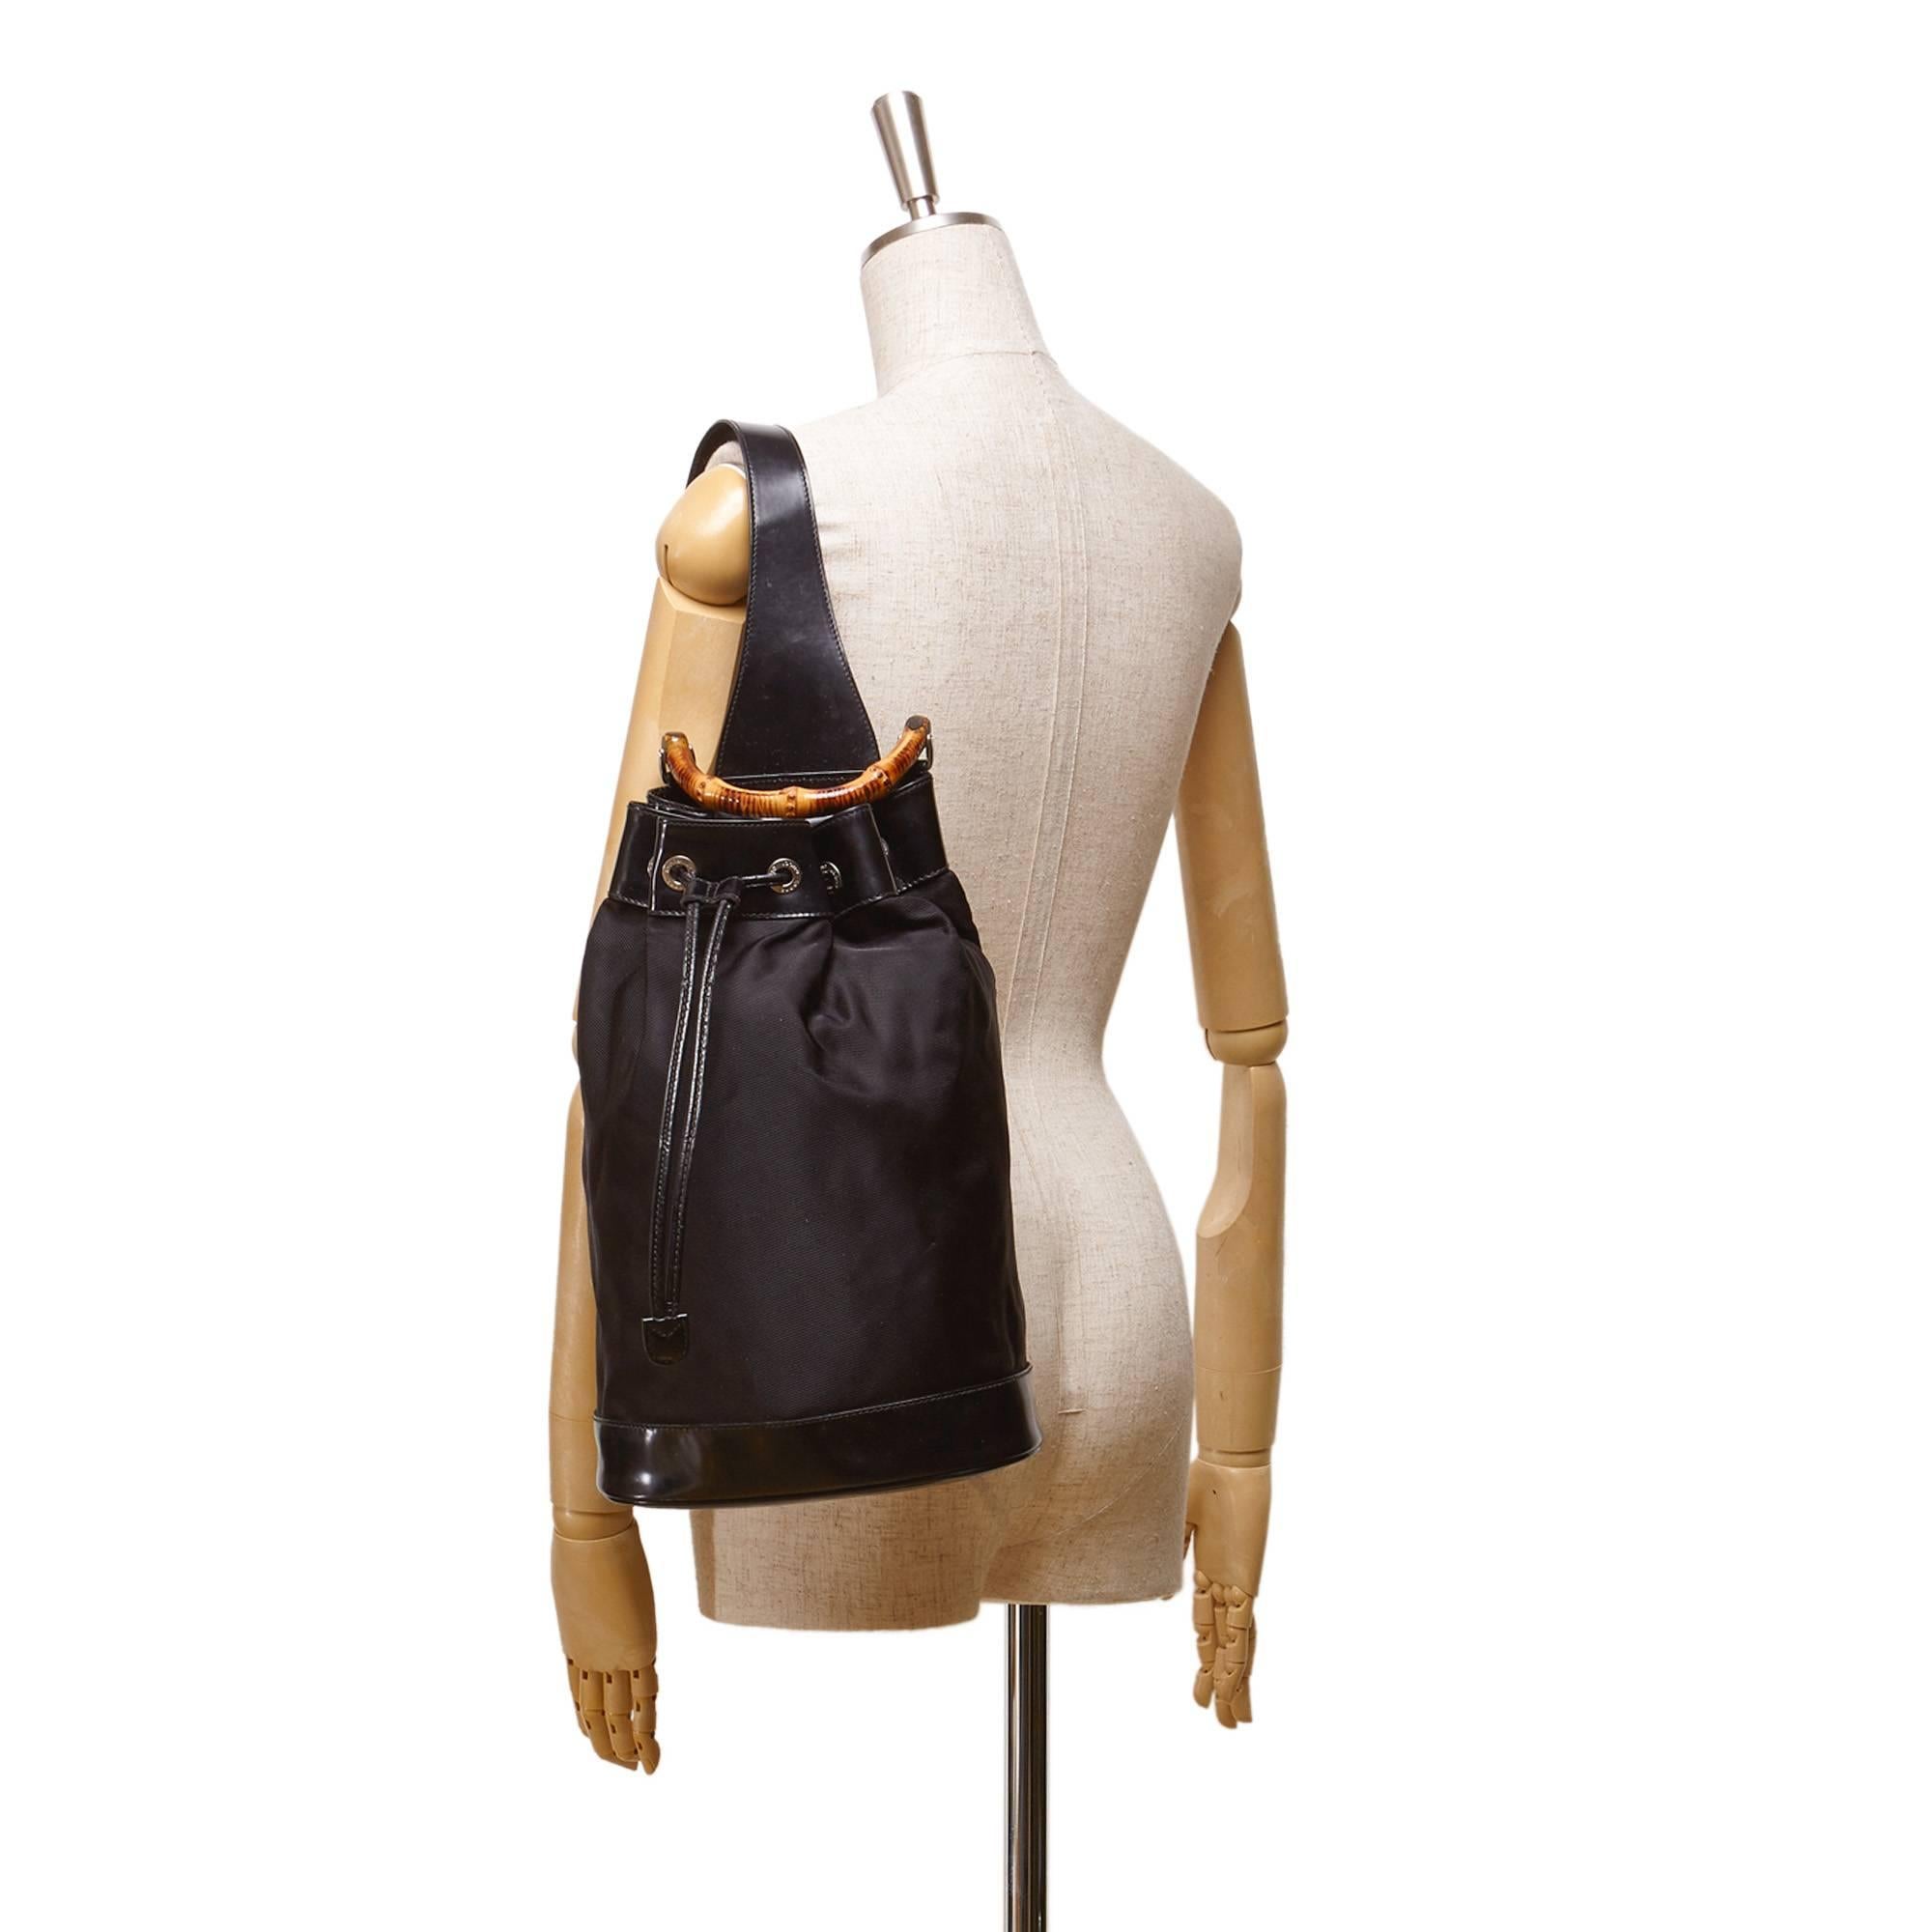 - This Gucci backpack features a black nylon body, a leather trim, an adjustable single shoulder strap, a bamboo handle, a drawstring closure, and a interior zip pocket. A classic and iconic bamboo handle of Gucci. Its still very stylish up till